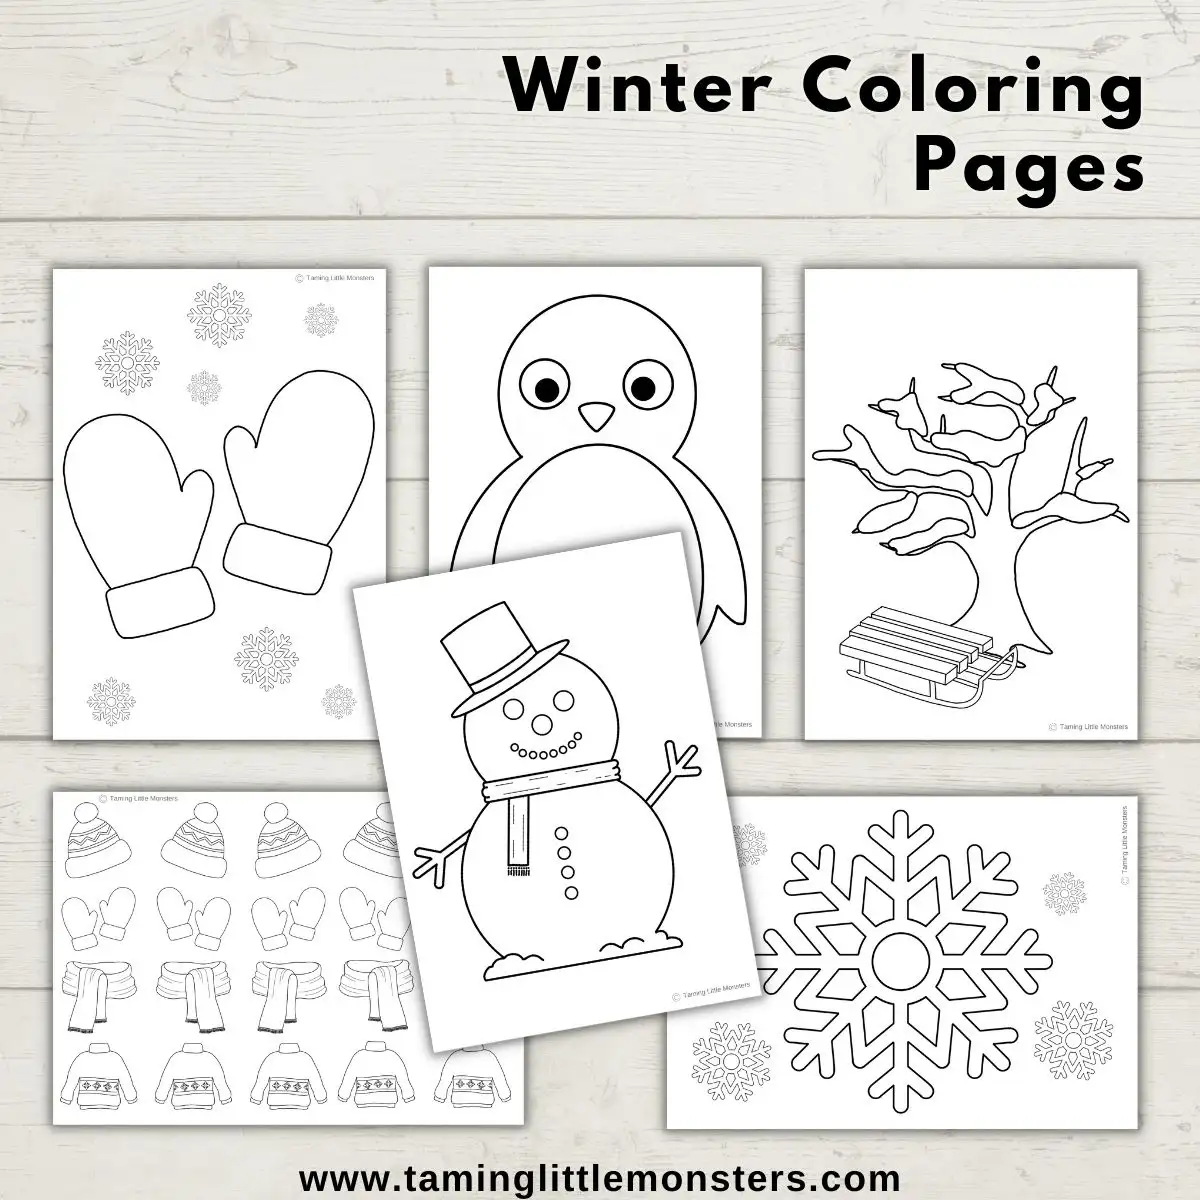 Free Printable Templates and Coloring Pages, 101 Activity